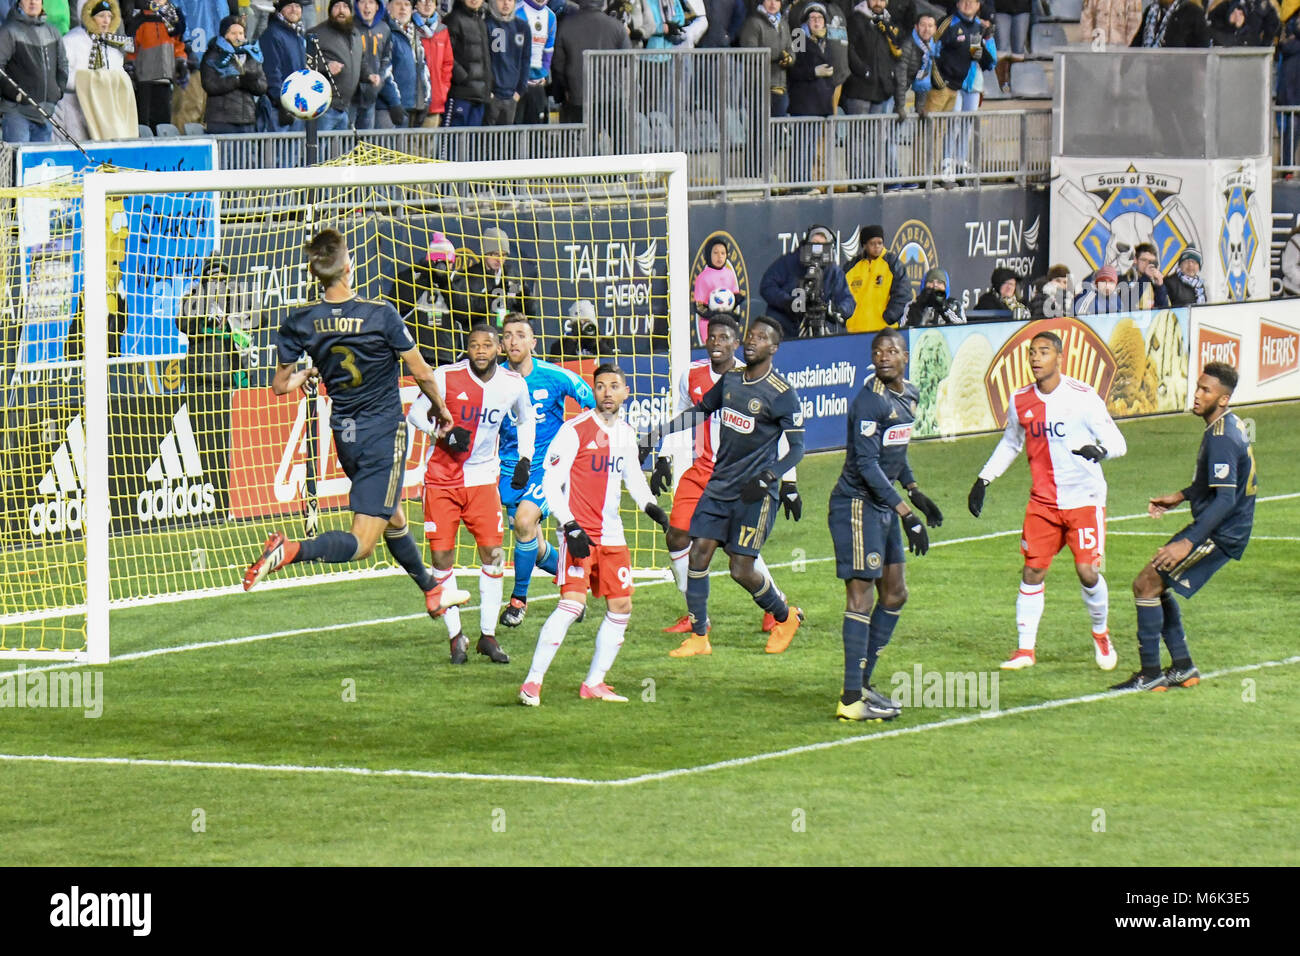 Soccer - football players jumping and leaping to head the ball during a Professional football - soccer match at Talen Energy Stadium, Chester, PA, USA. 3rd Mar, 2018. The MLS Philadelphia Union defeat the New England Revolution 2-0 in their season home opener Credit: Don Mennig/Alamy Live News Stock Photo